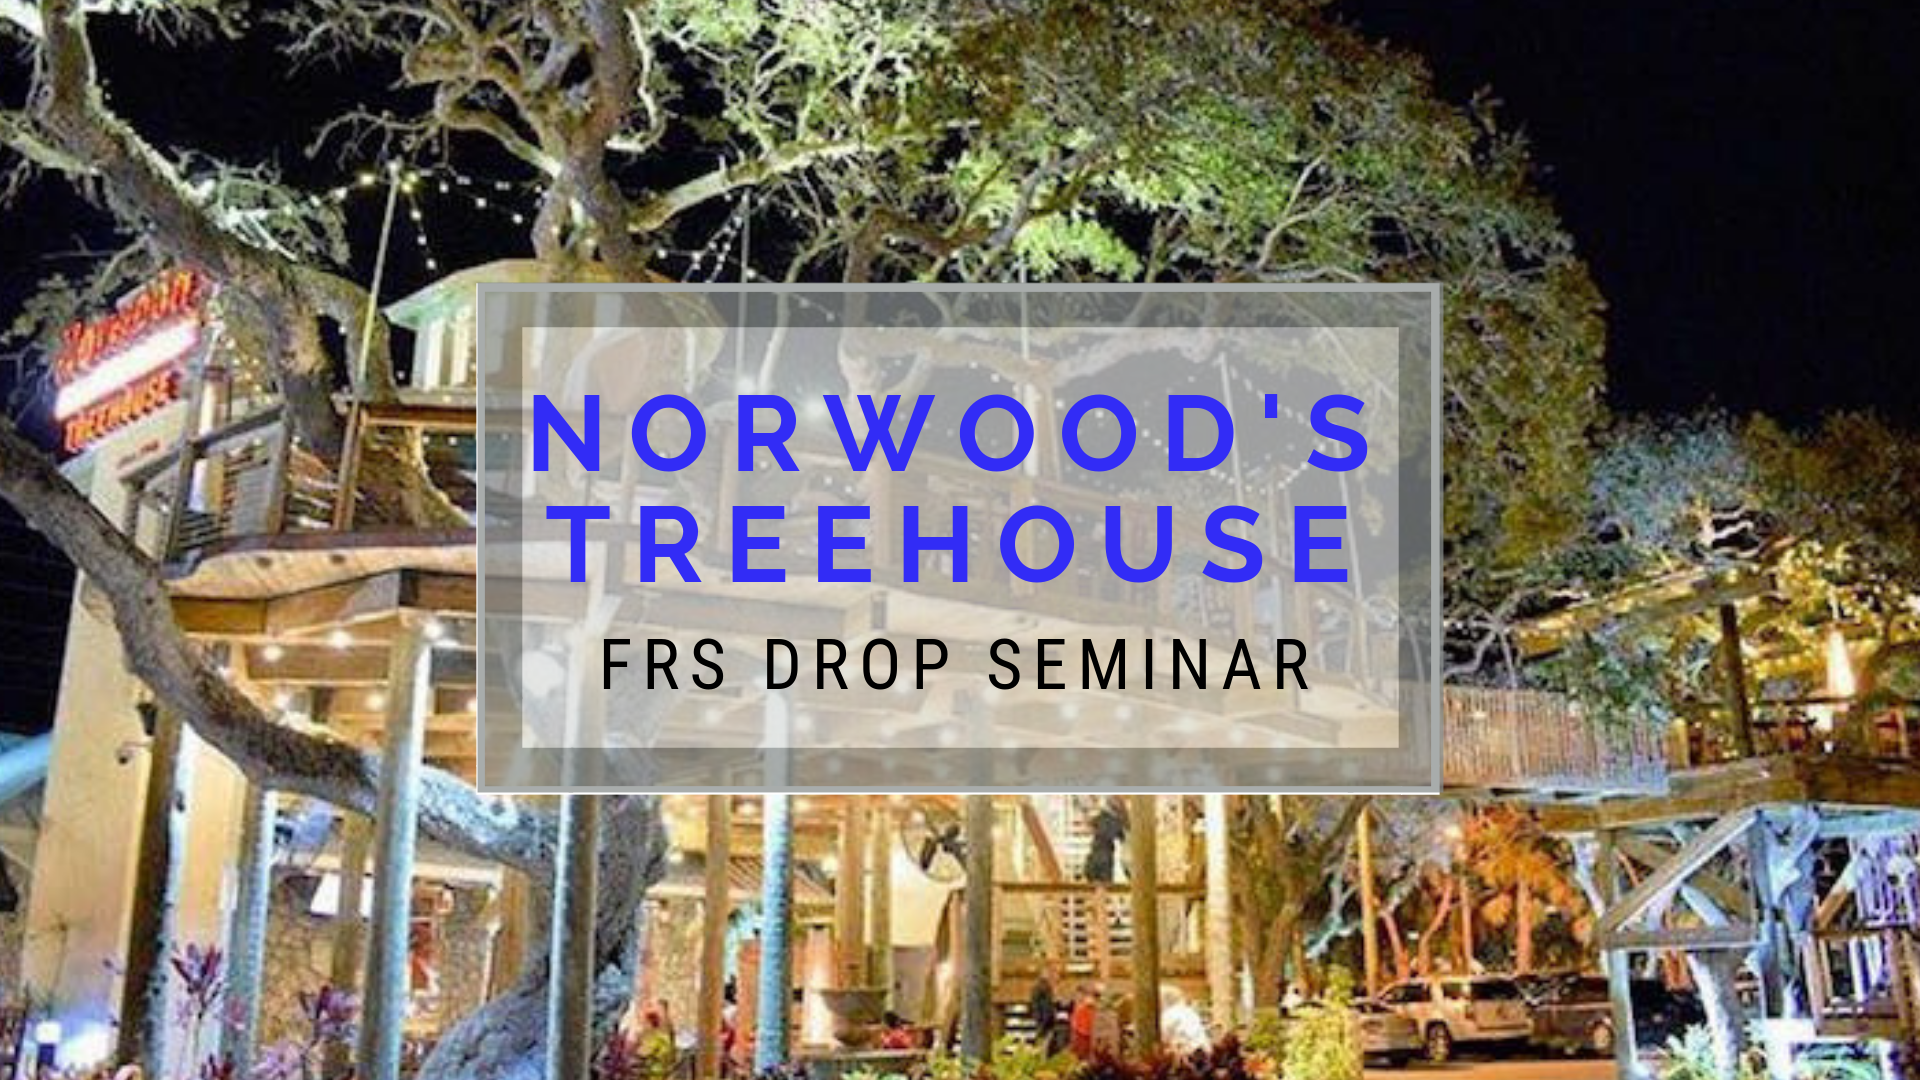 Join us for an FRS DROP Rollover Seminar at Norwood's Treehouse. Anders Retirement & Investment Advisors